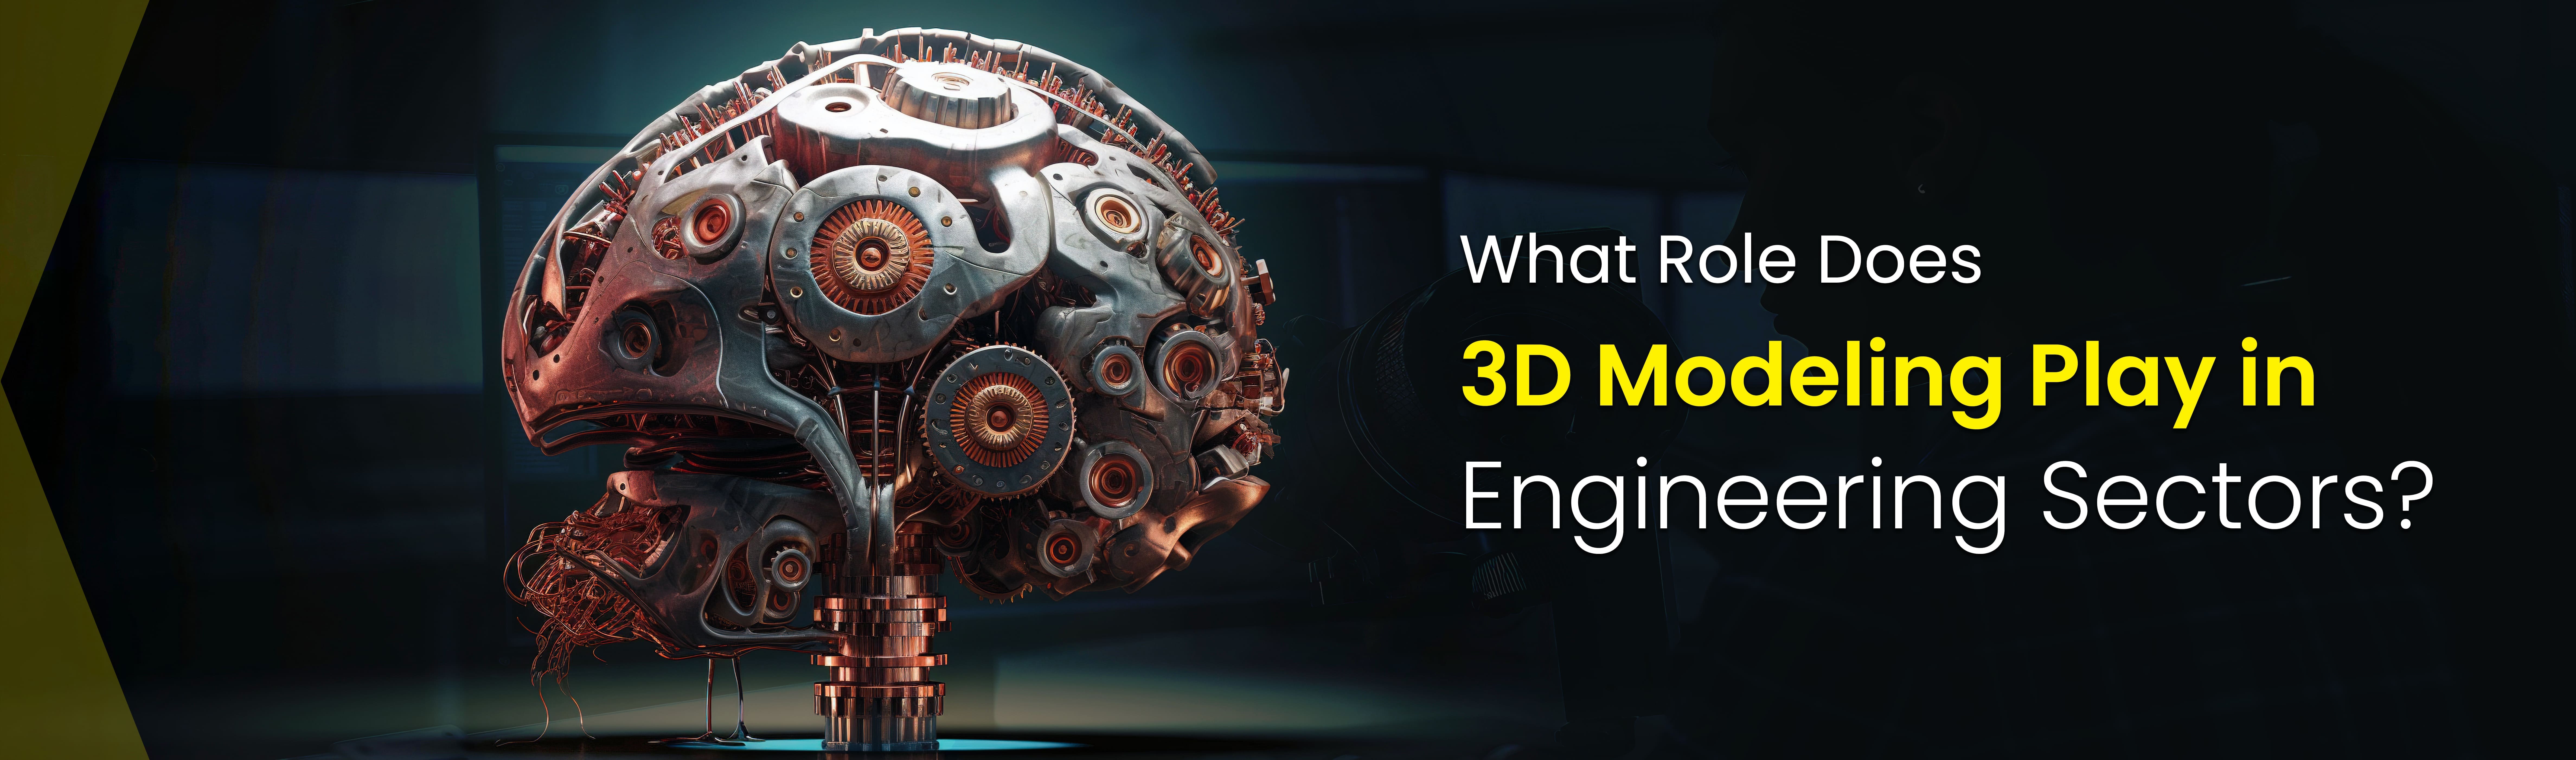 what role does 3D Modeling Play in Engineering Sectors